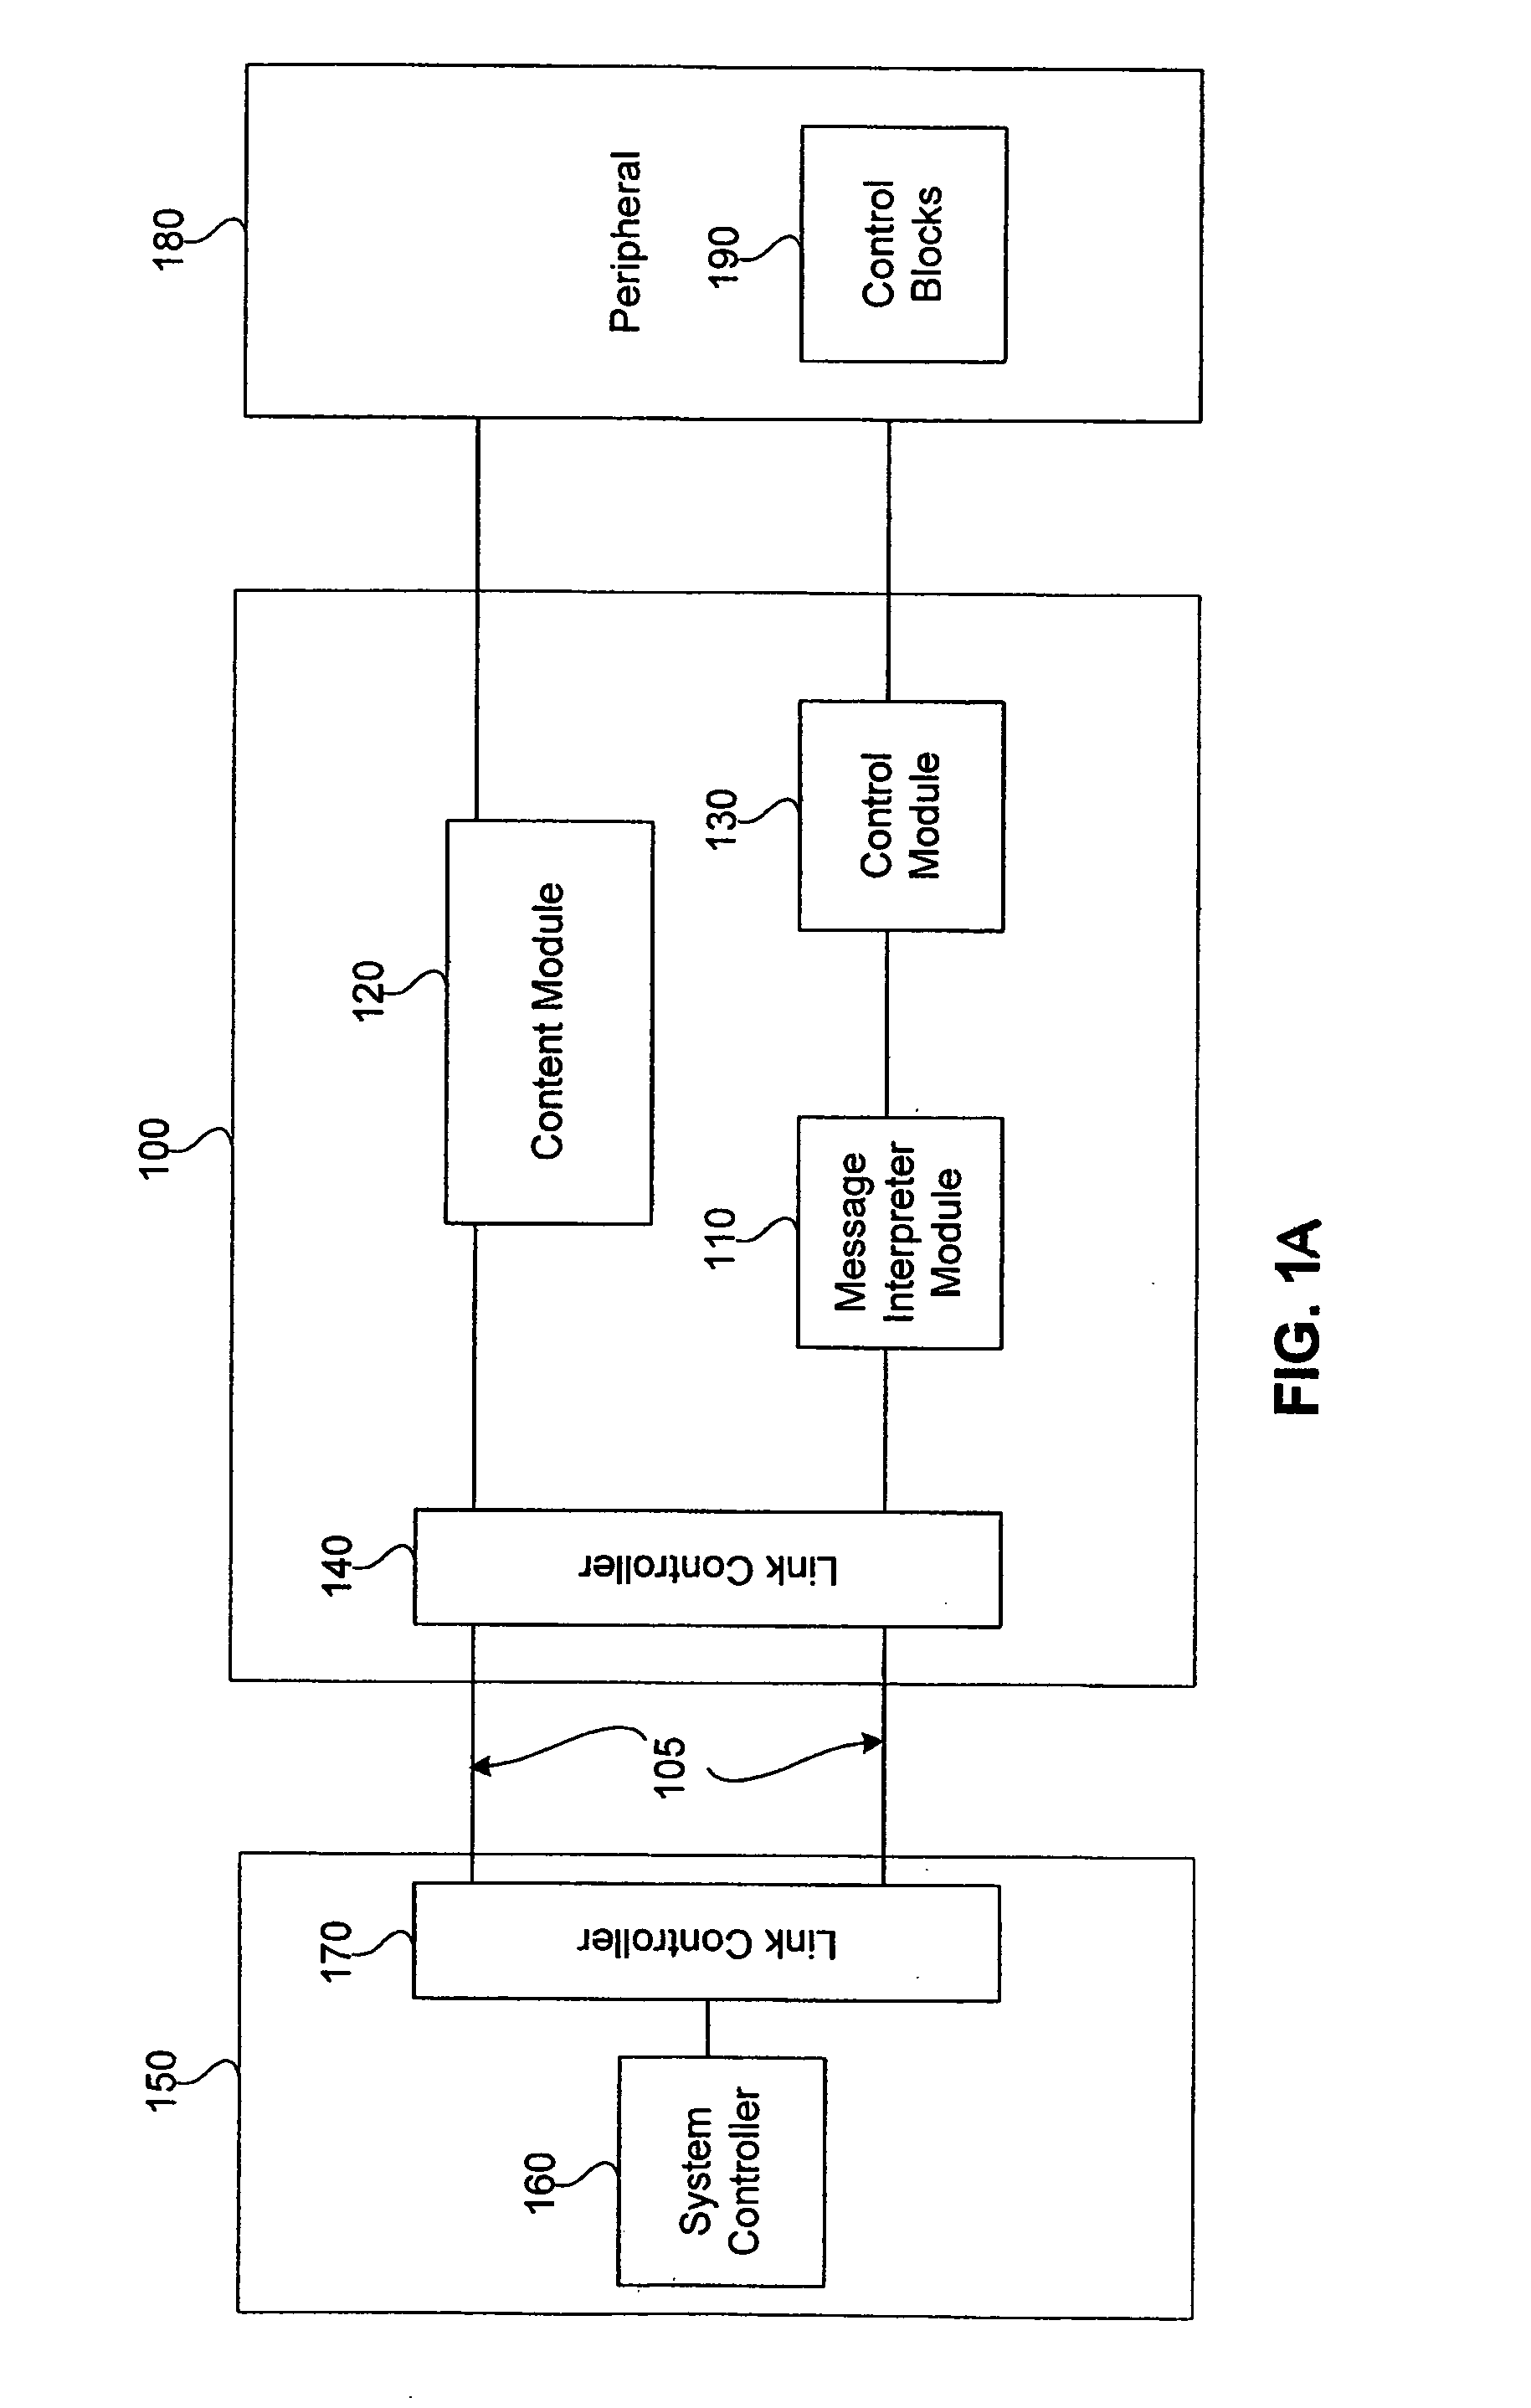 Methods and systems for synchronous execution of commands across a communication link